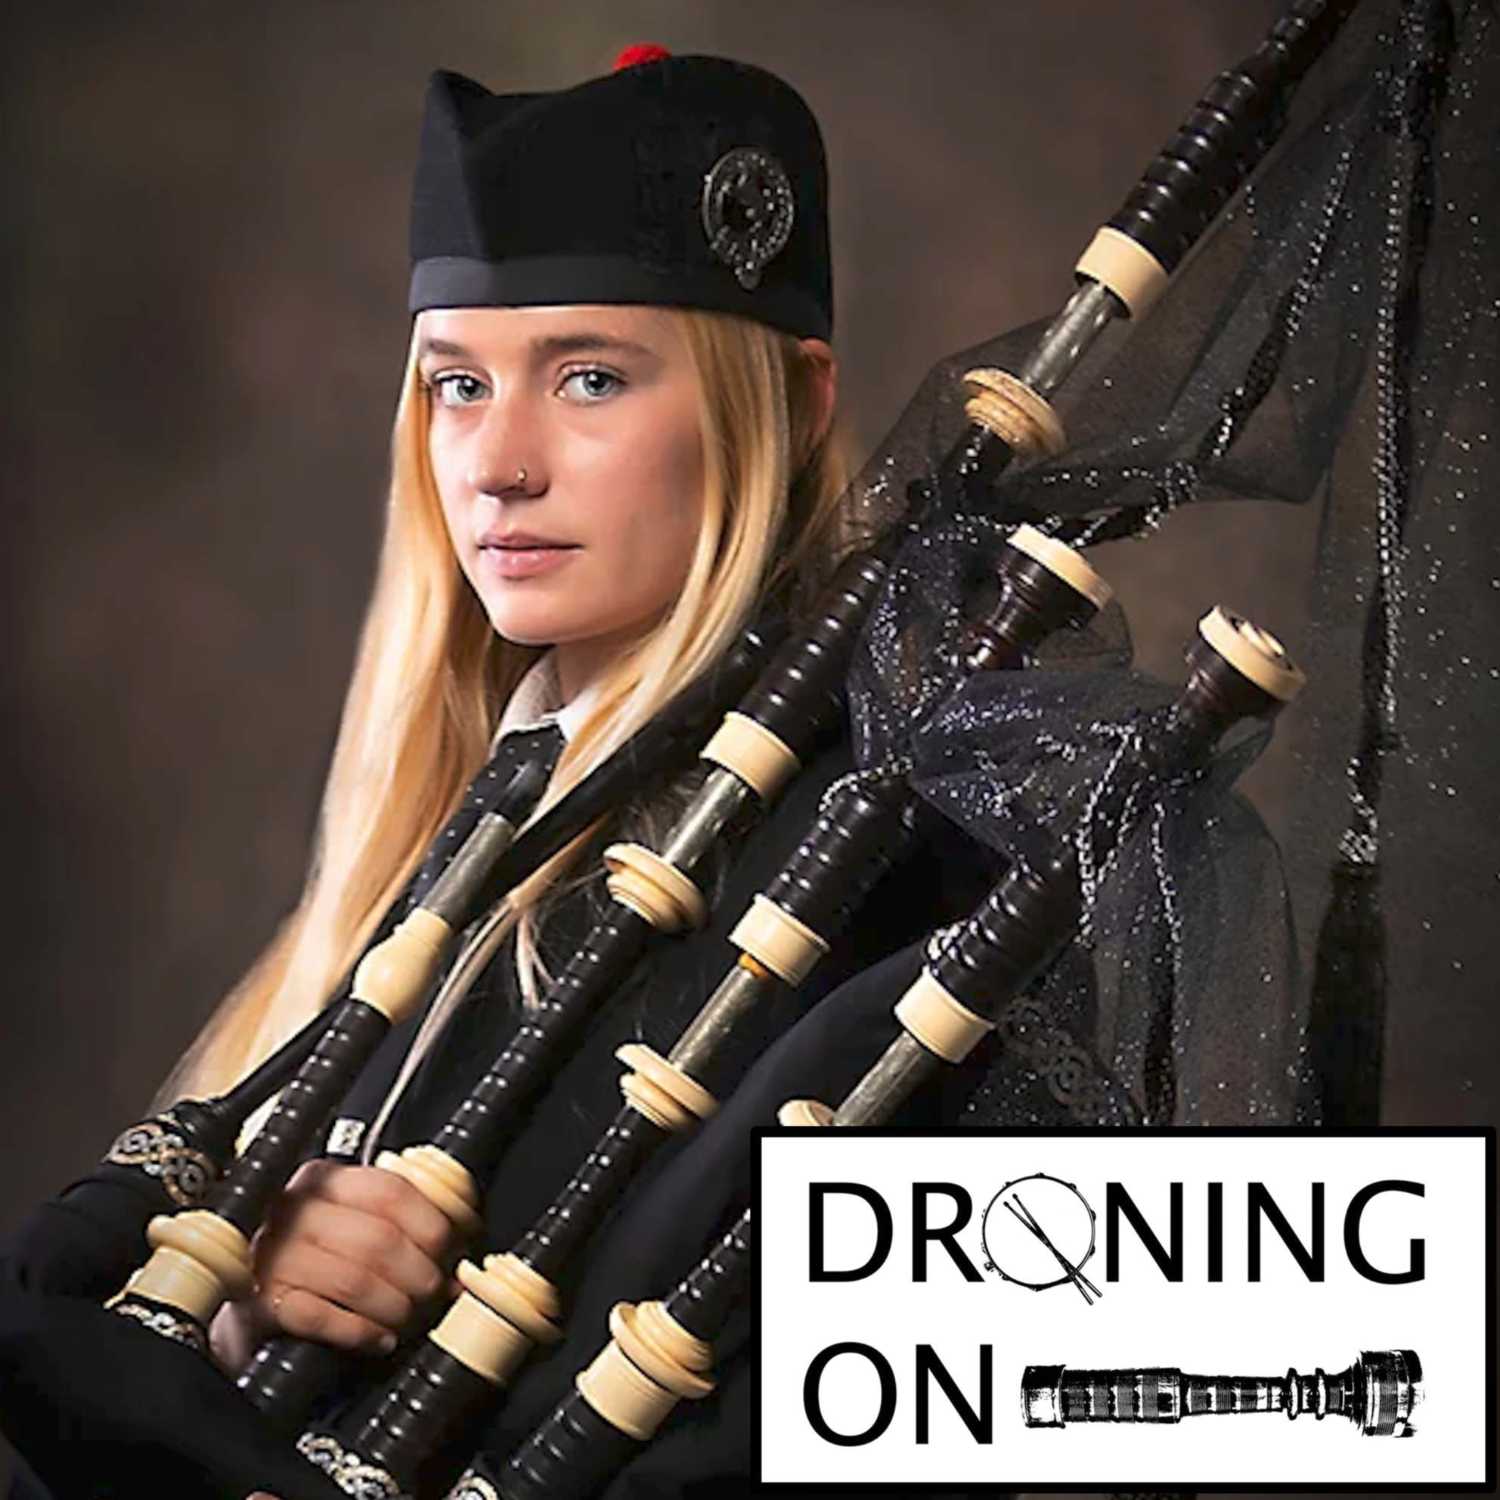 095: The Gemma Bagpipes Episode